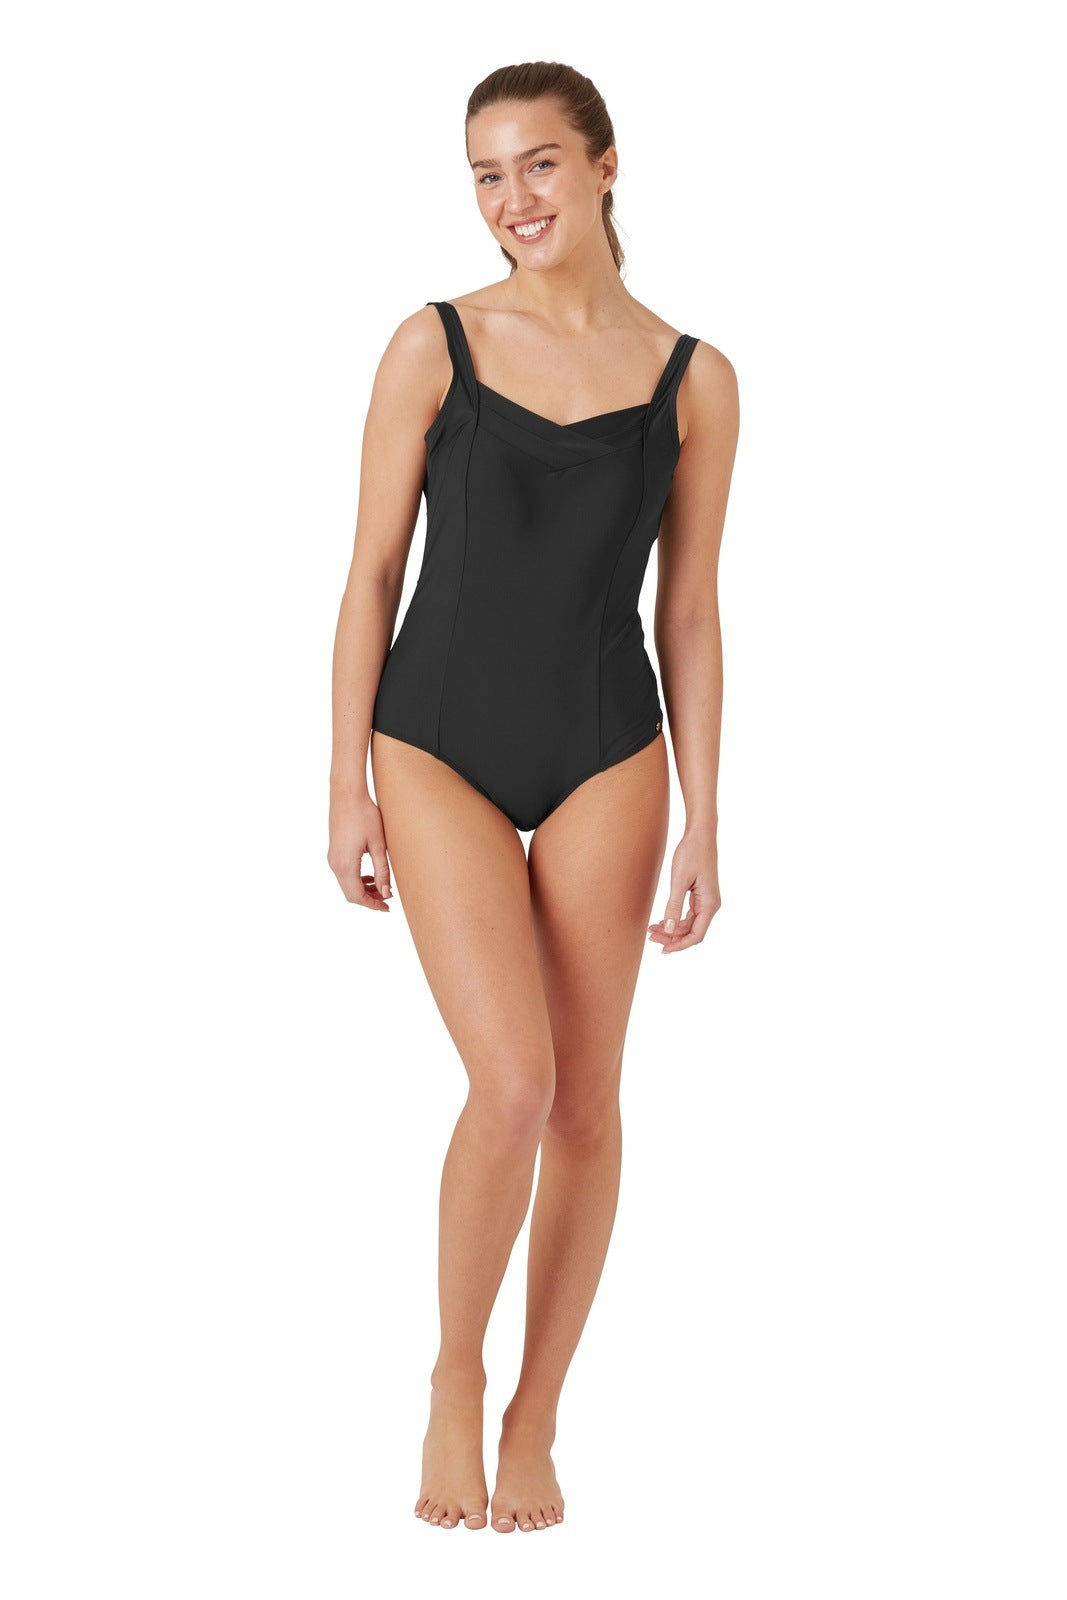 Oyster Bay Plain Pleated Swimsuit - Black 1 Shaws Department Stores